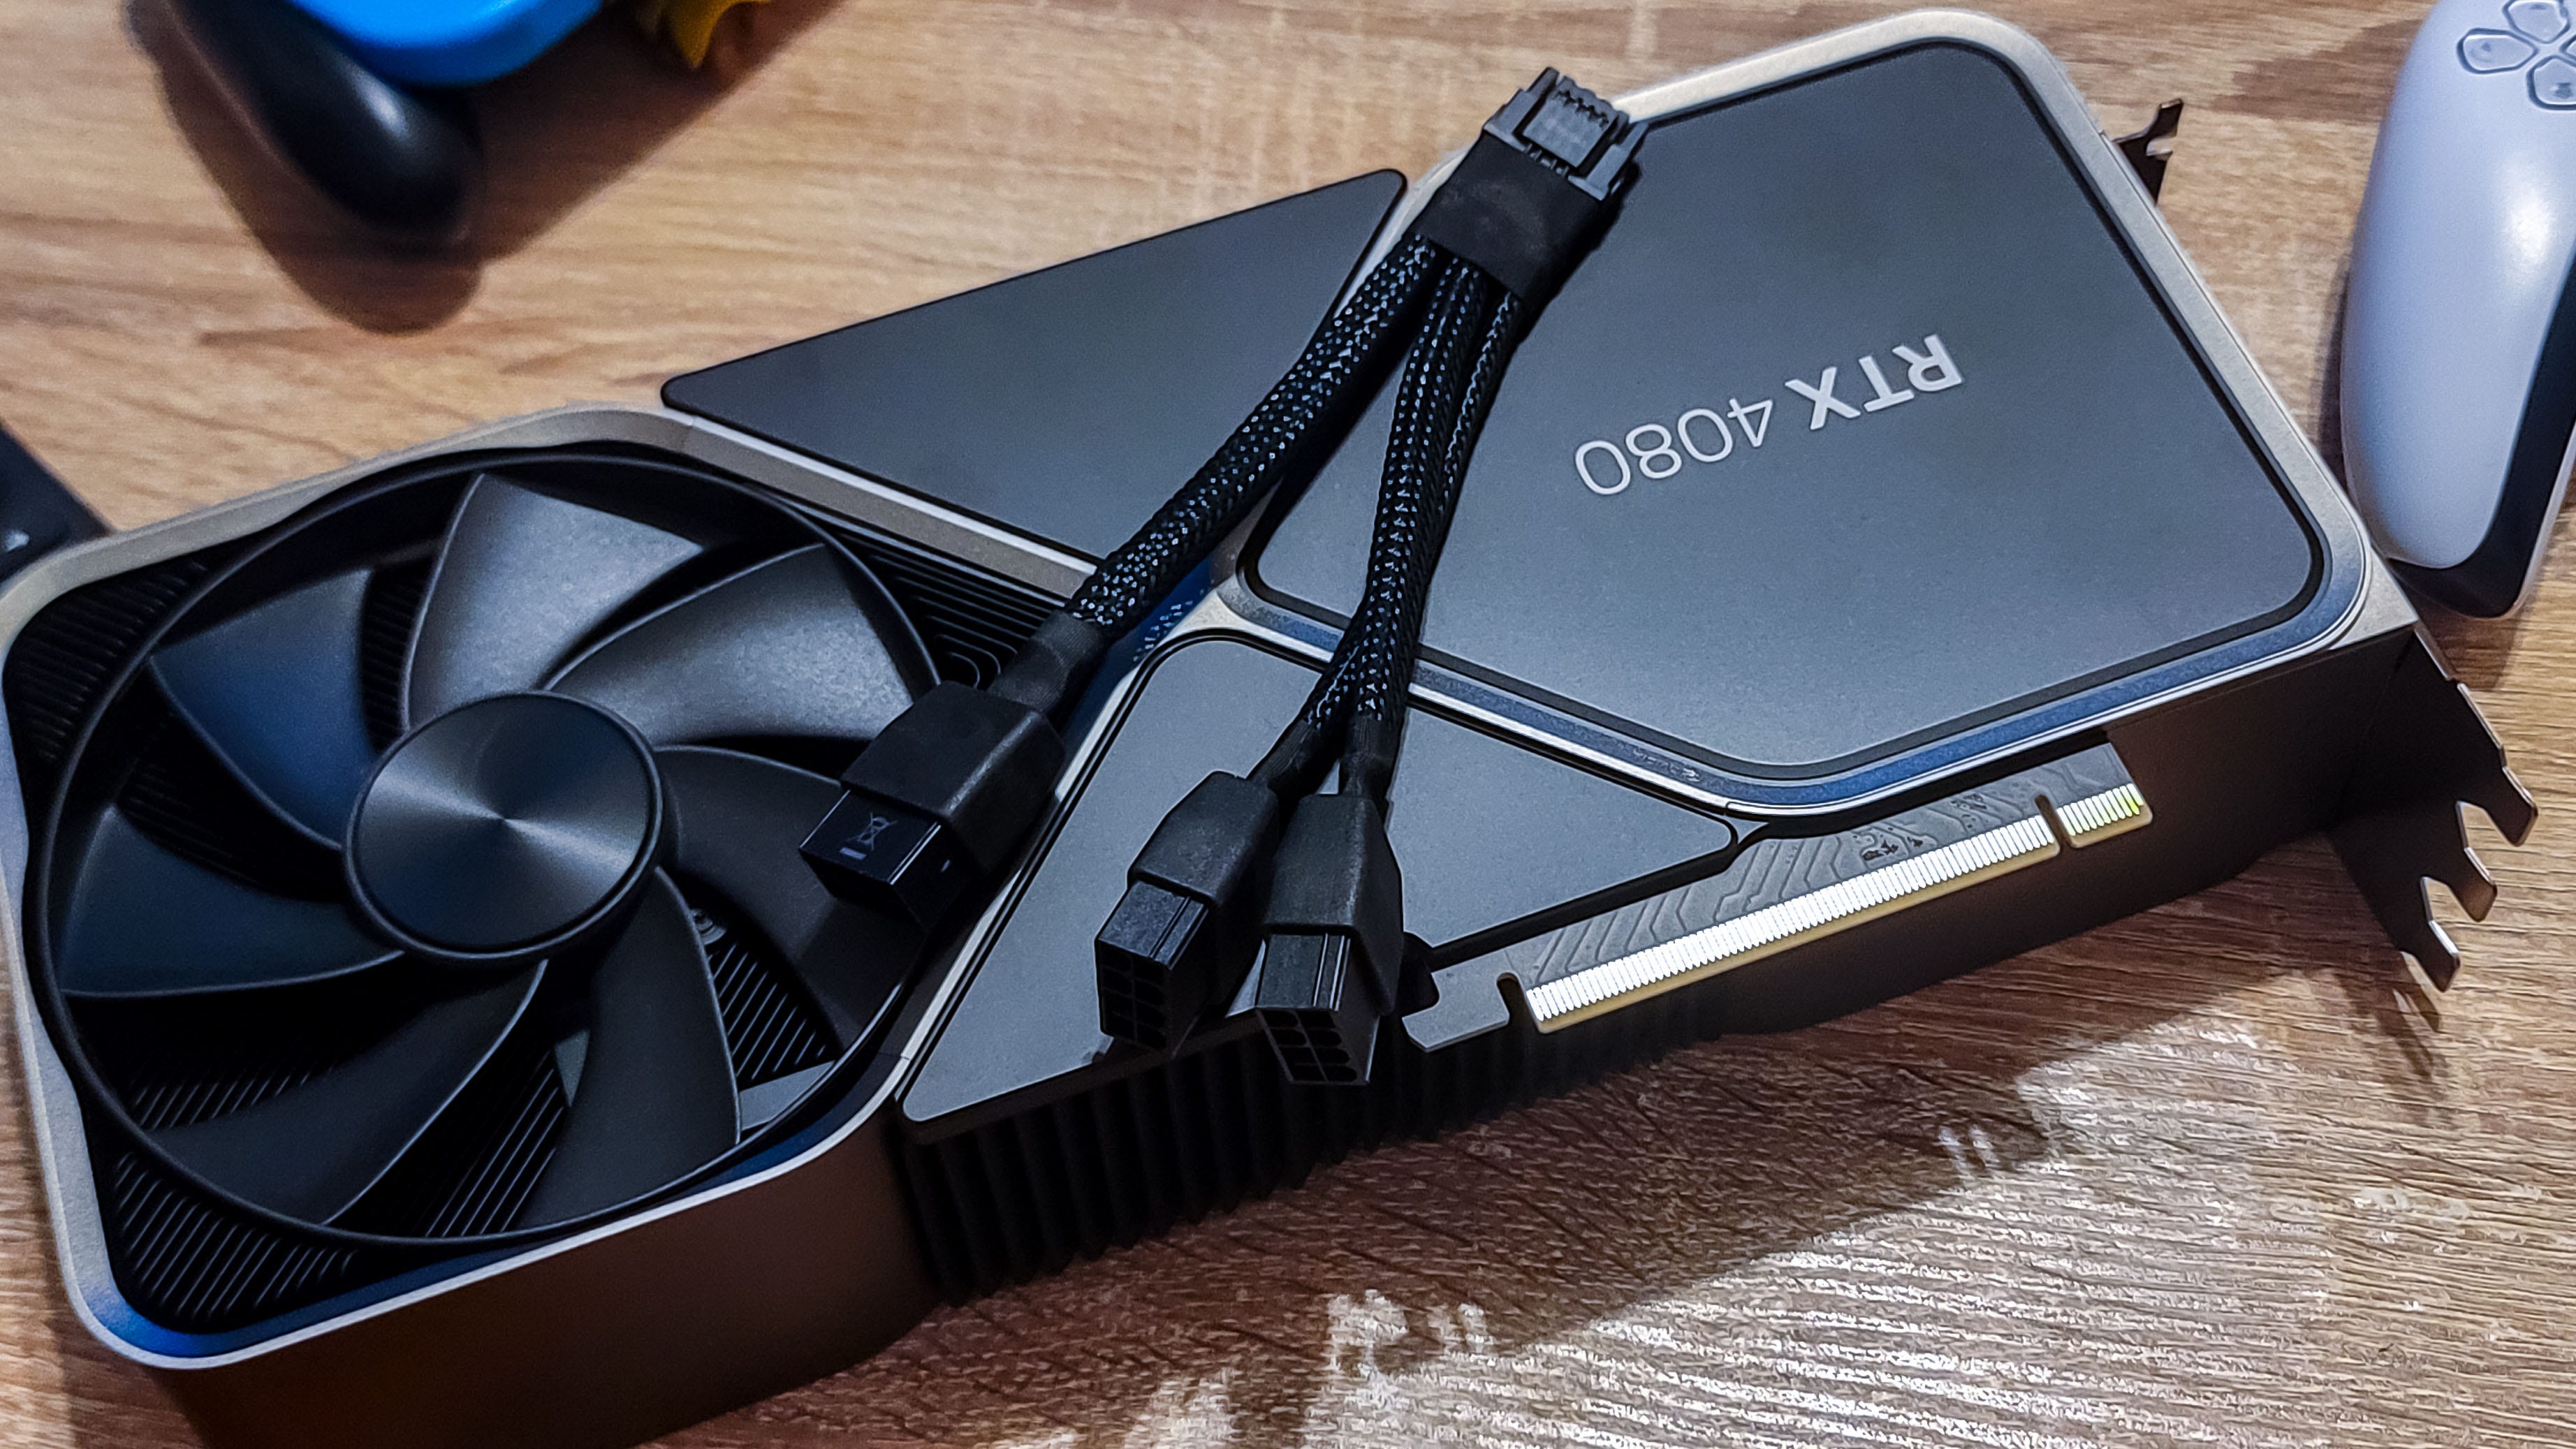 Nvidia GeForce RTX 4080 Review: More Efficient, Still Expensive